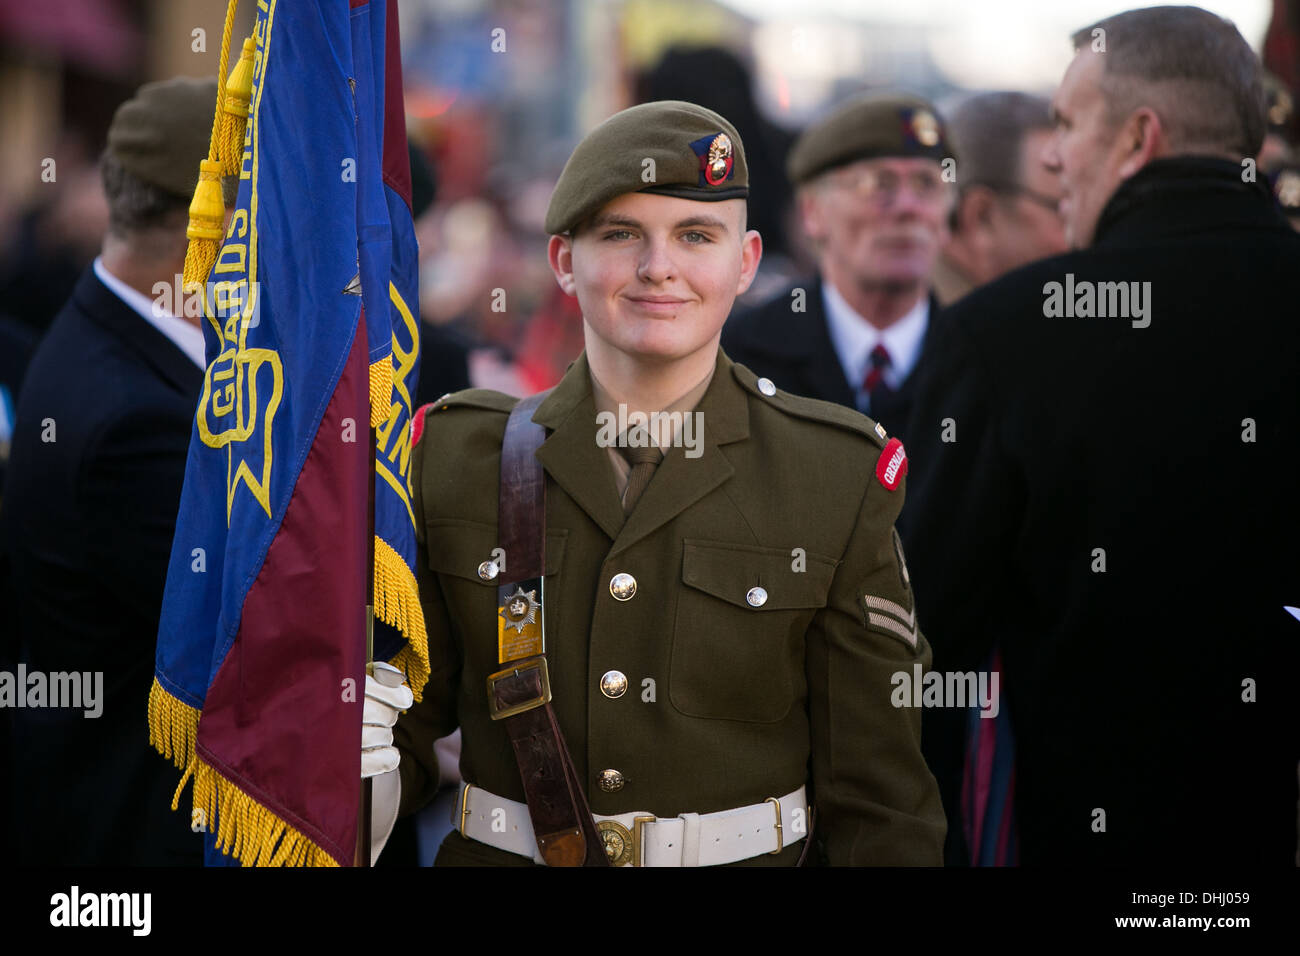 10-11-13 MANCHESTER , England. Remembrance Sunday Service at St Peter's Square , Manchester City Centre. Stock Photo